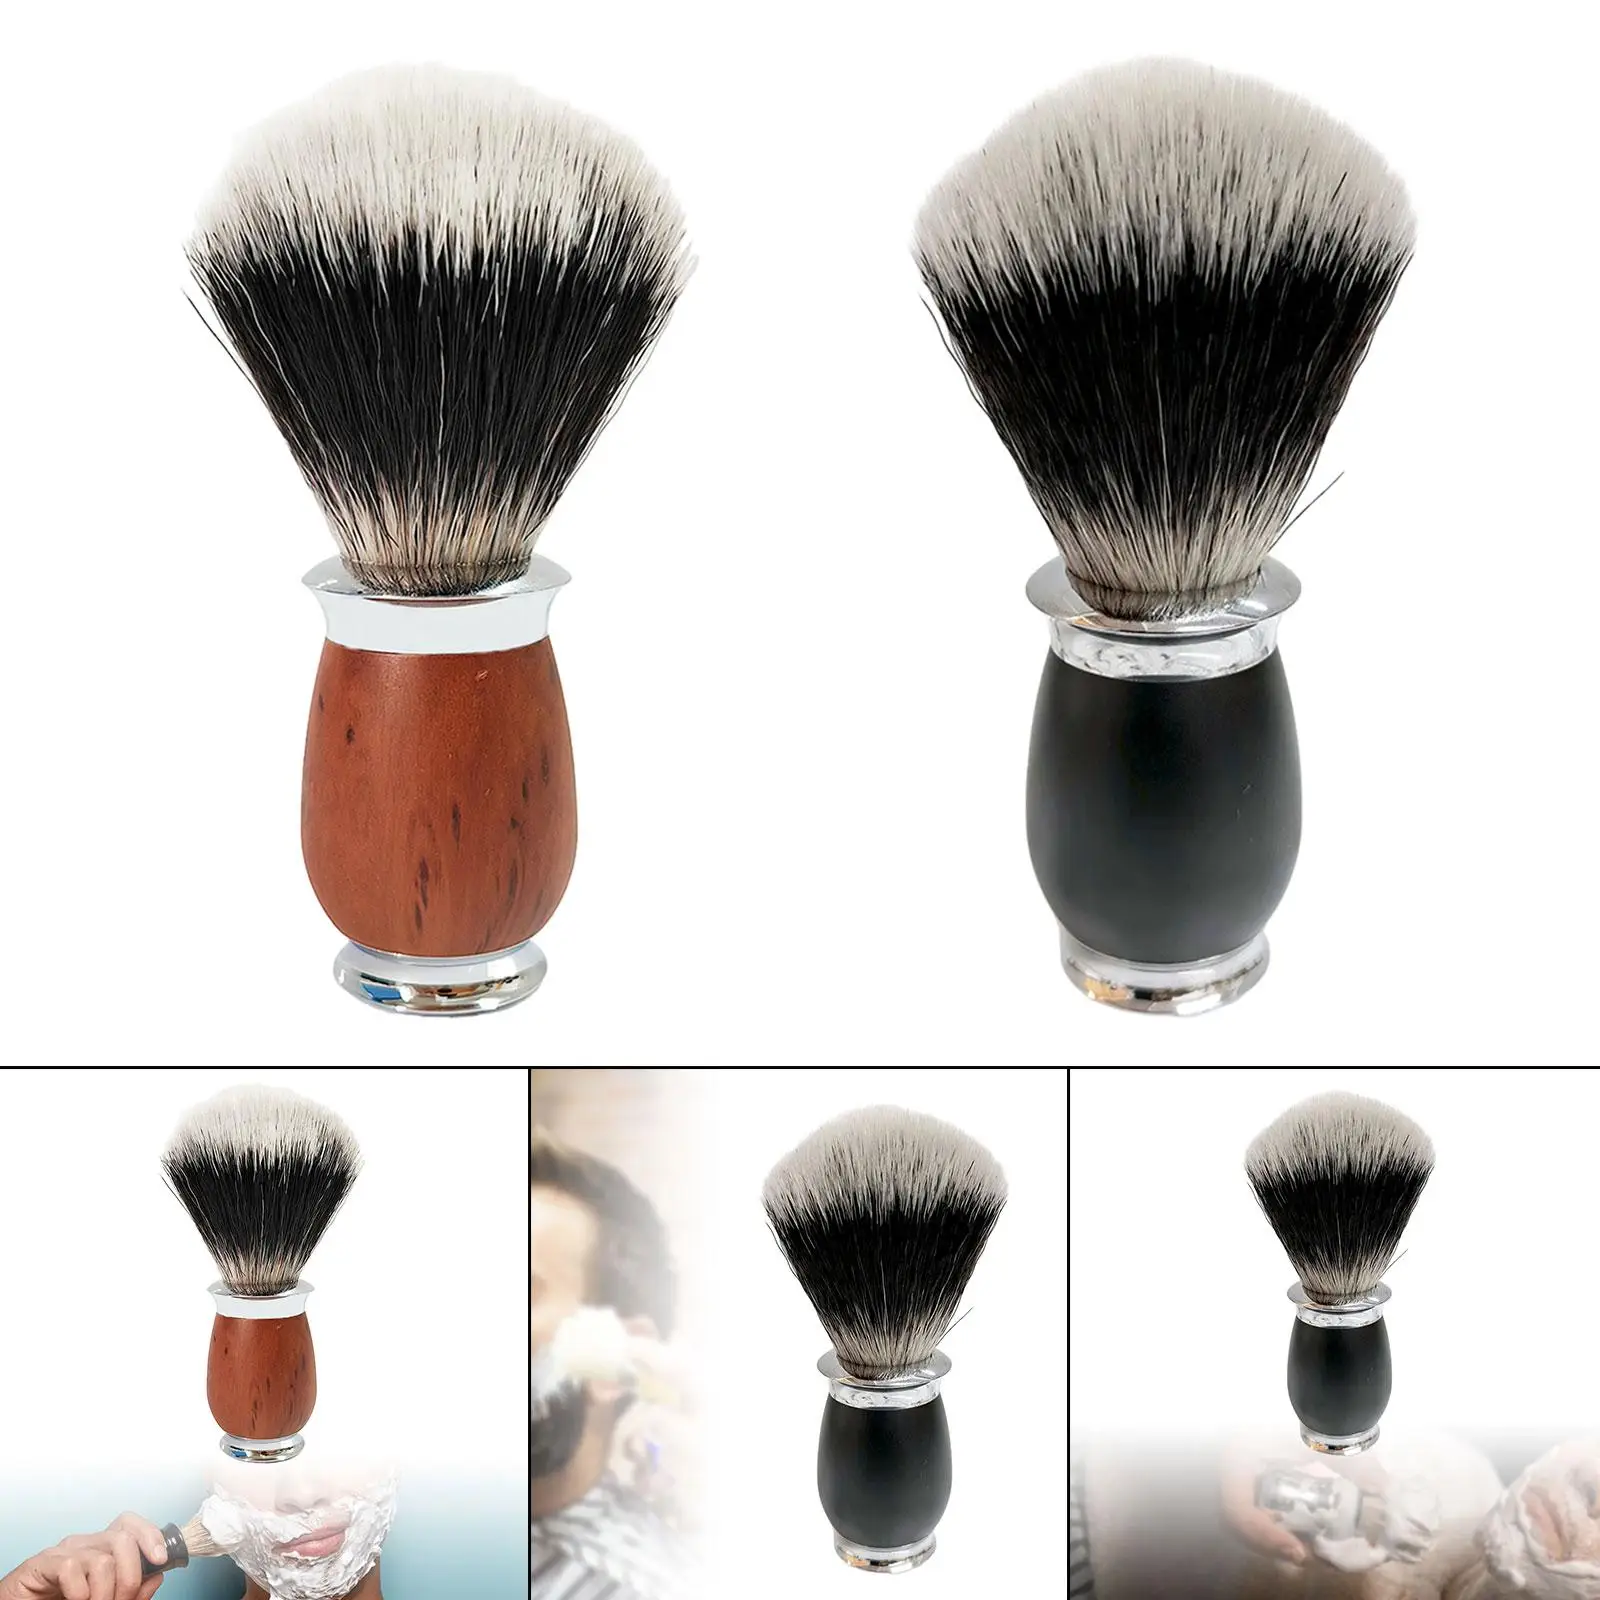 Men Shaving Brush Rich Lather Ergonomic Travel Christmas Gifts Shave Accessory Face Cleaning Hand Crafted for Dad Boyfriend